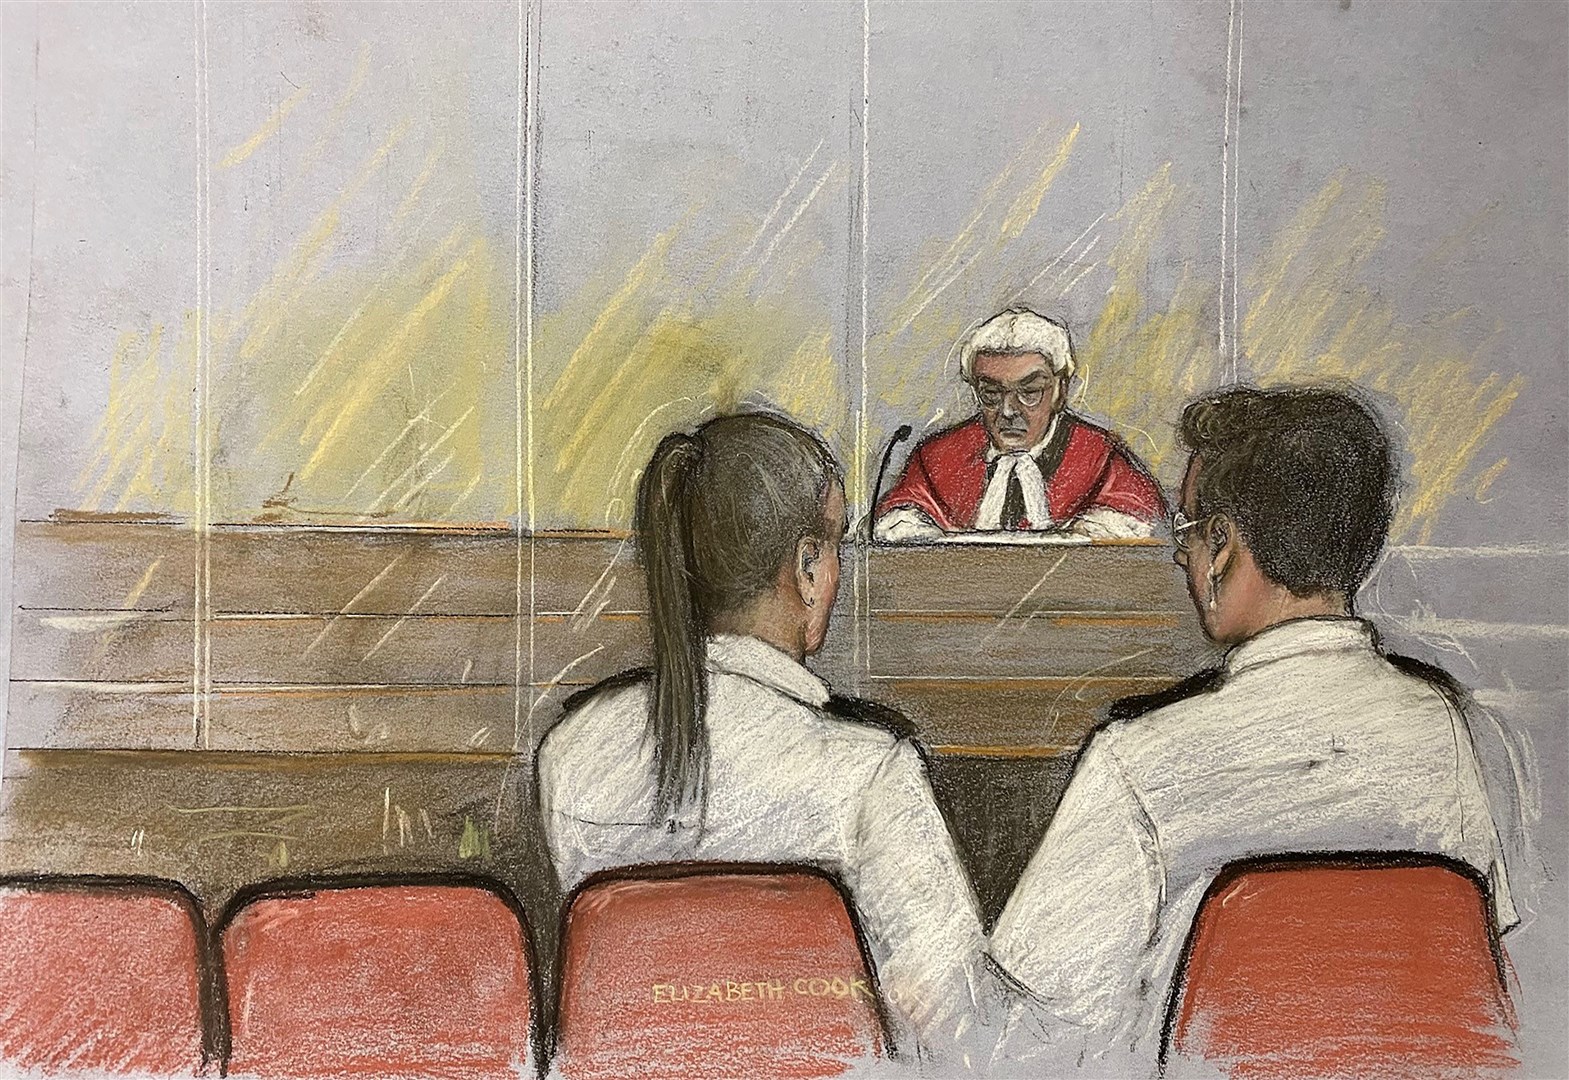 A court sketch of Judge Mr Justice Goss addressing the dock containing two dock officers beside empty seats during the sentencing (Elizabeth Cook/PA)